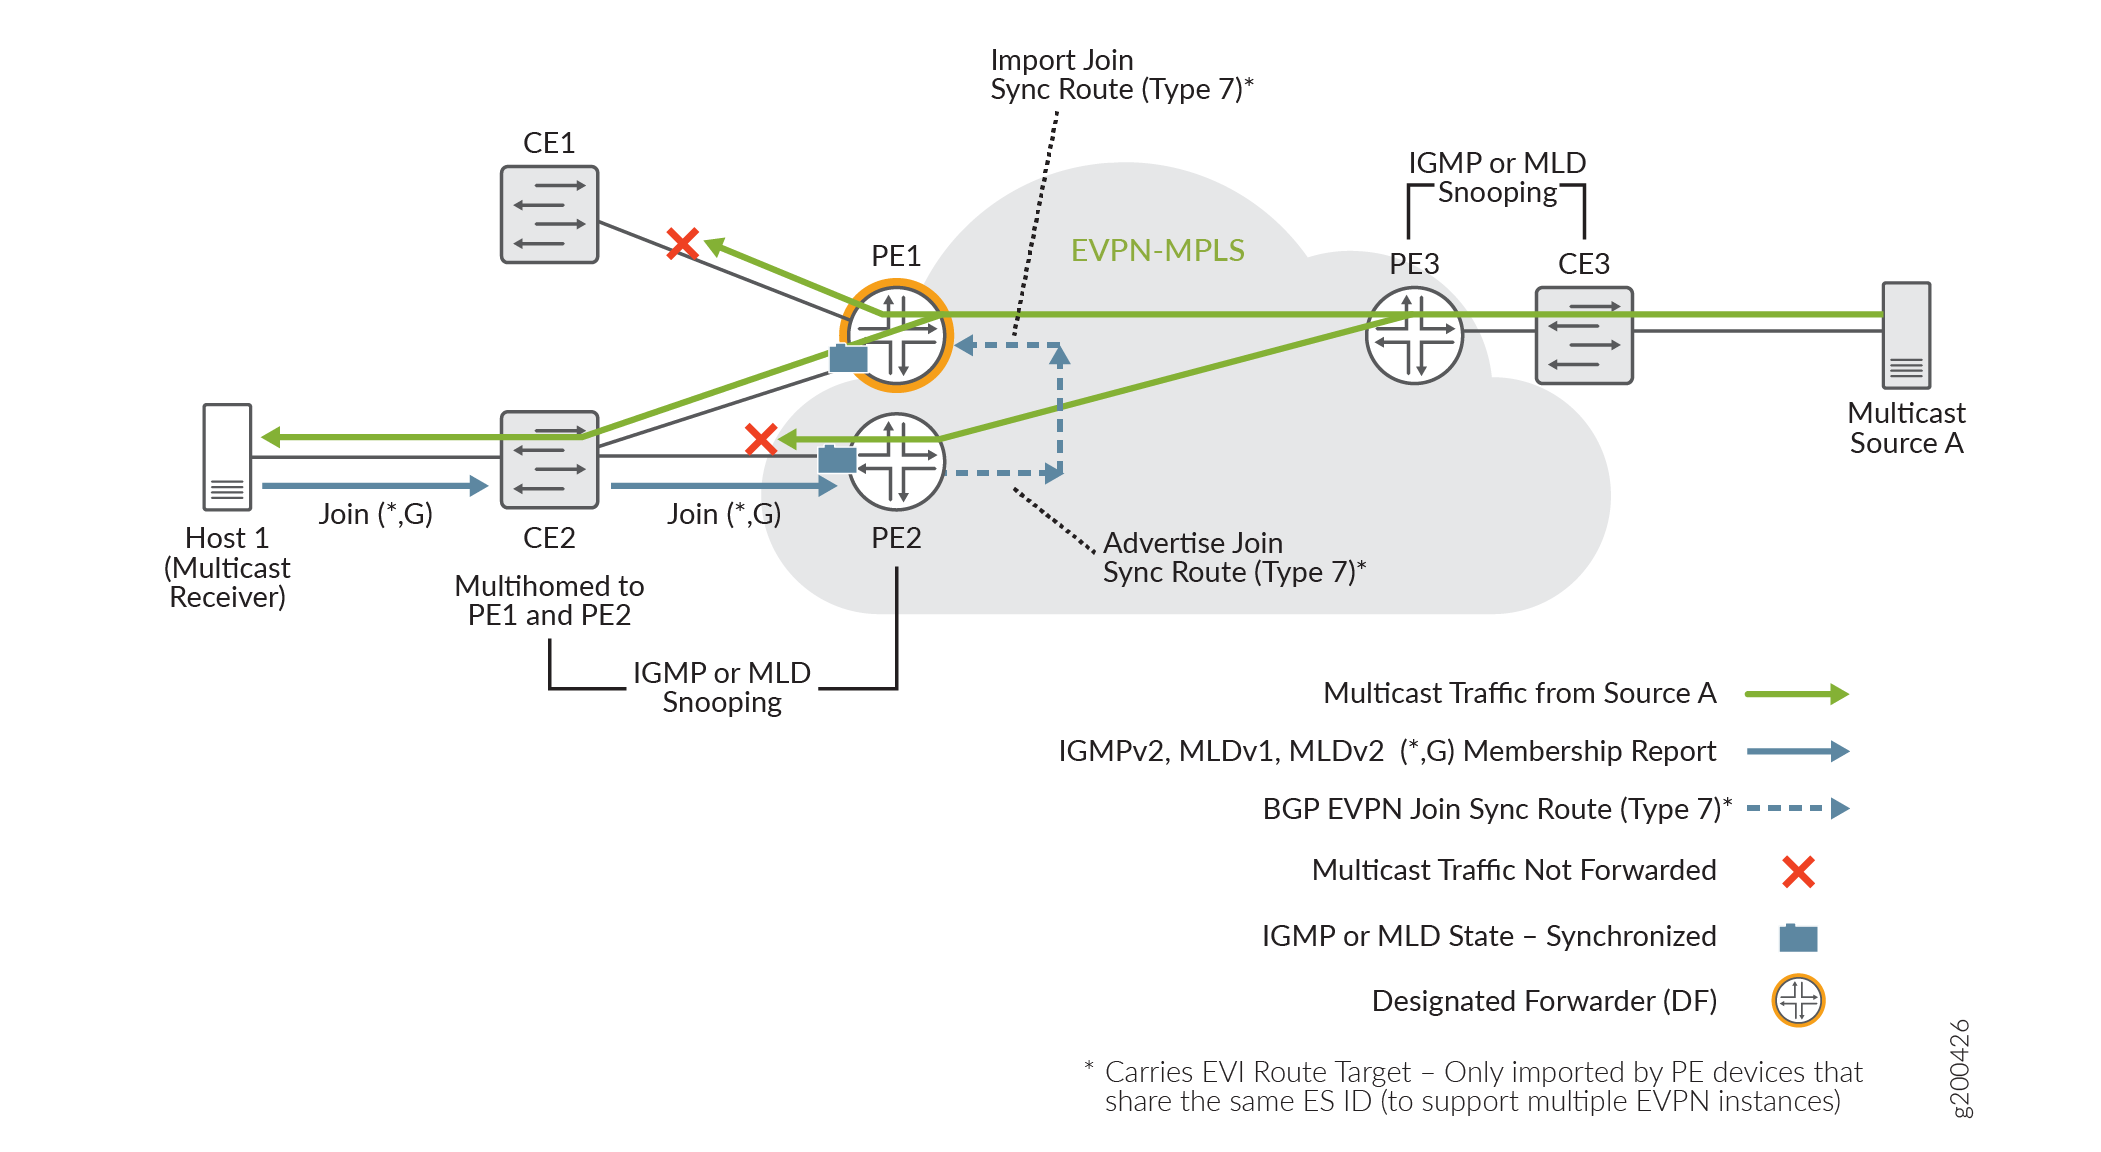 Multicast Forwarding for Multihomed Receivers in EVPN-MPLS on EX9200 Switches, MX Series Routers, and VMX Routers